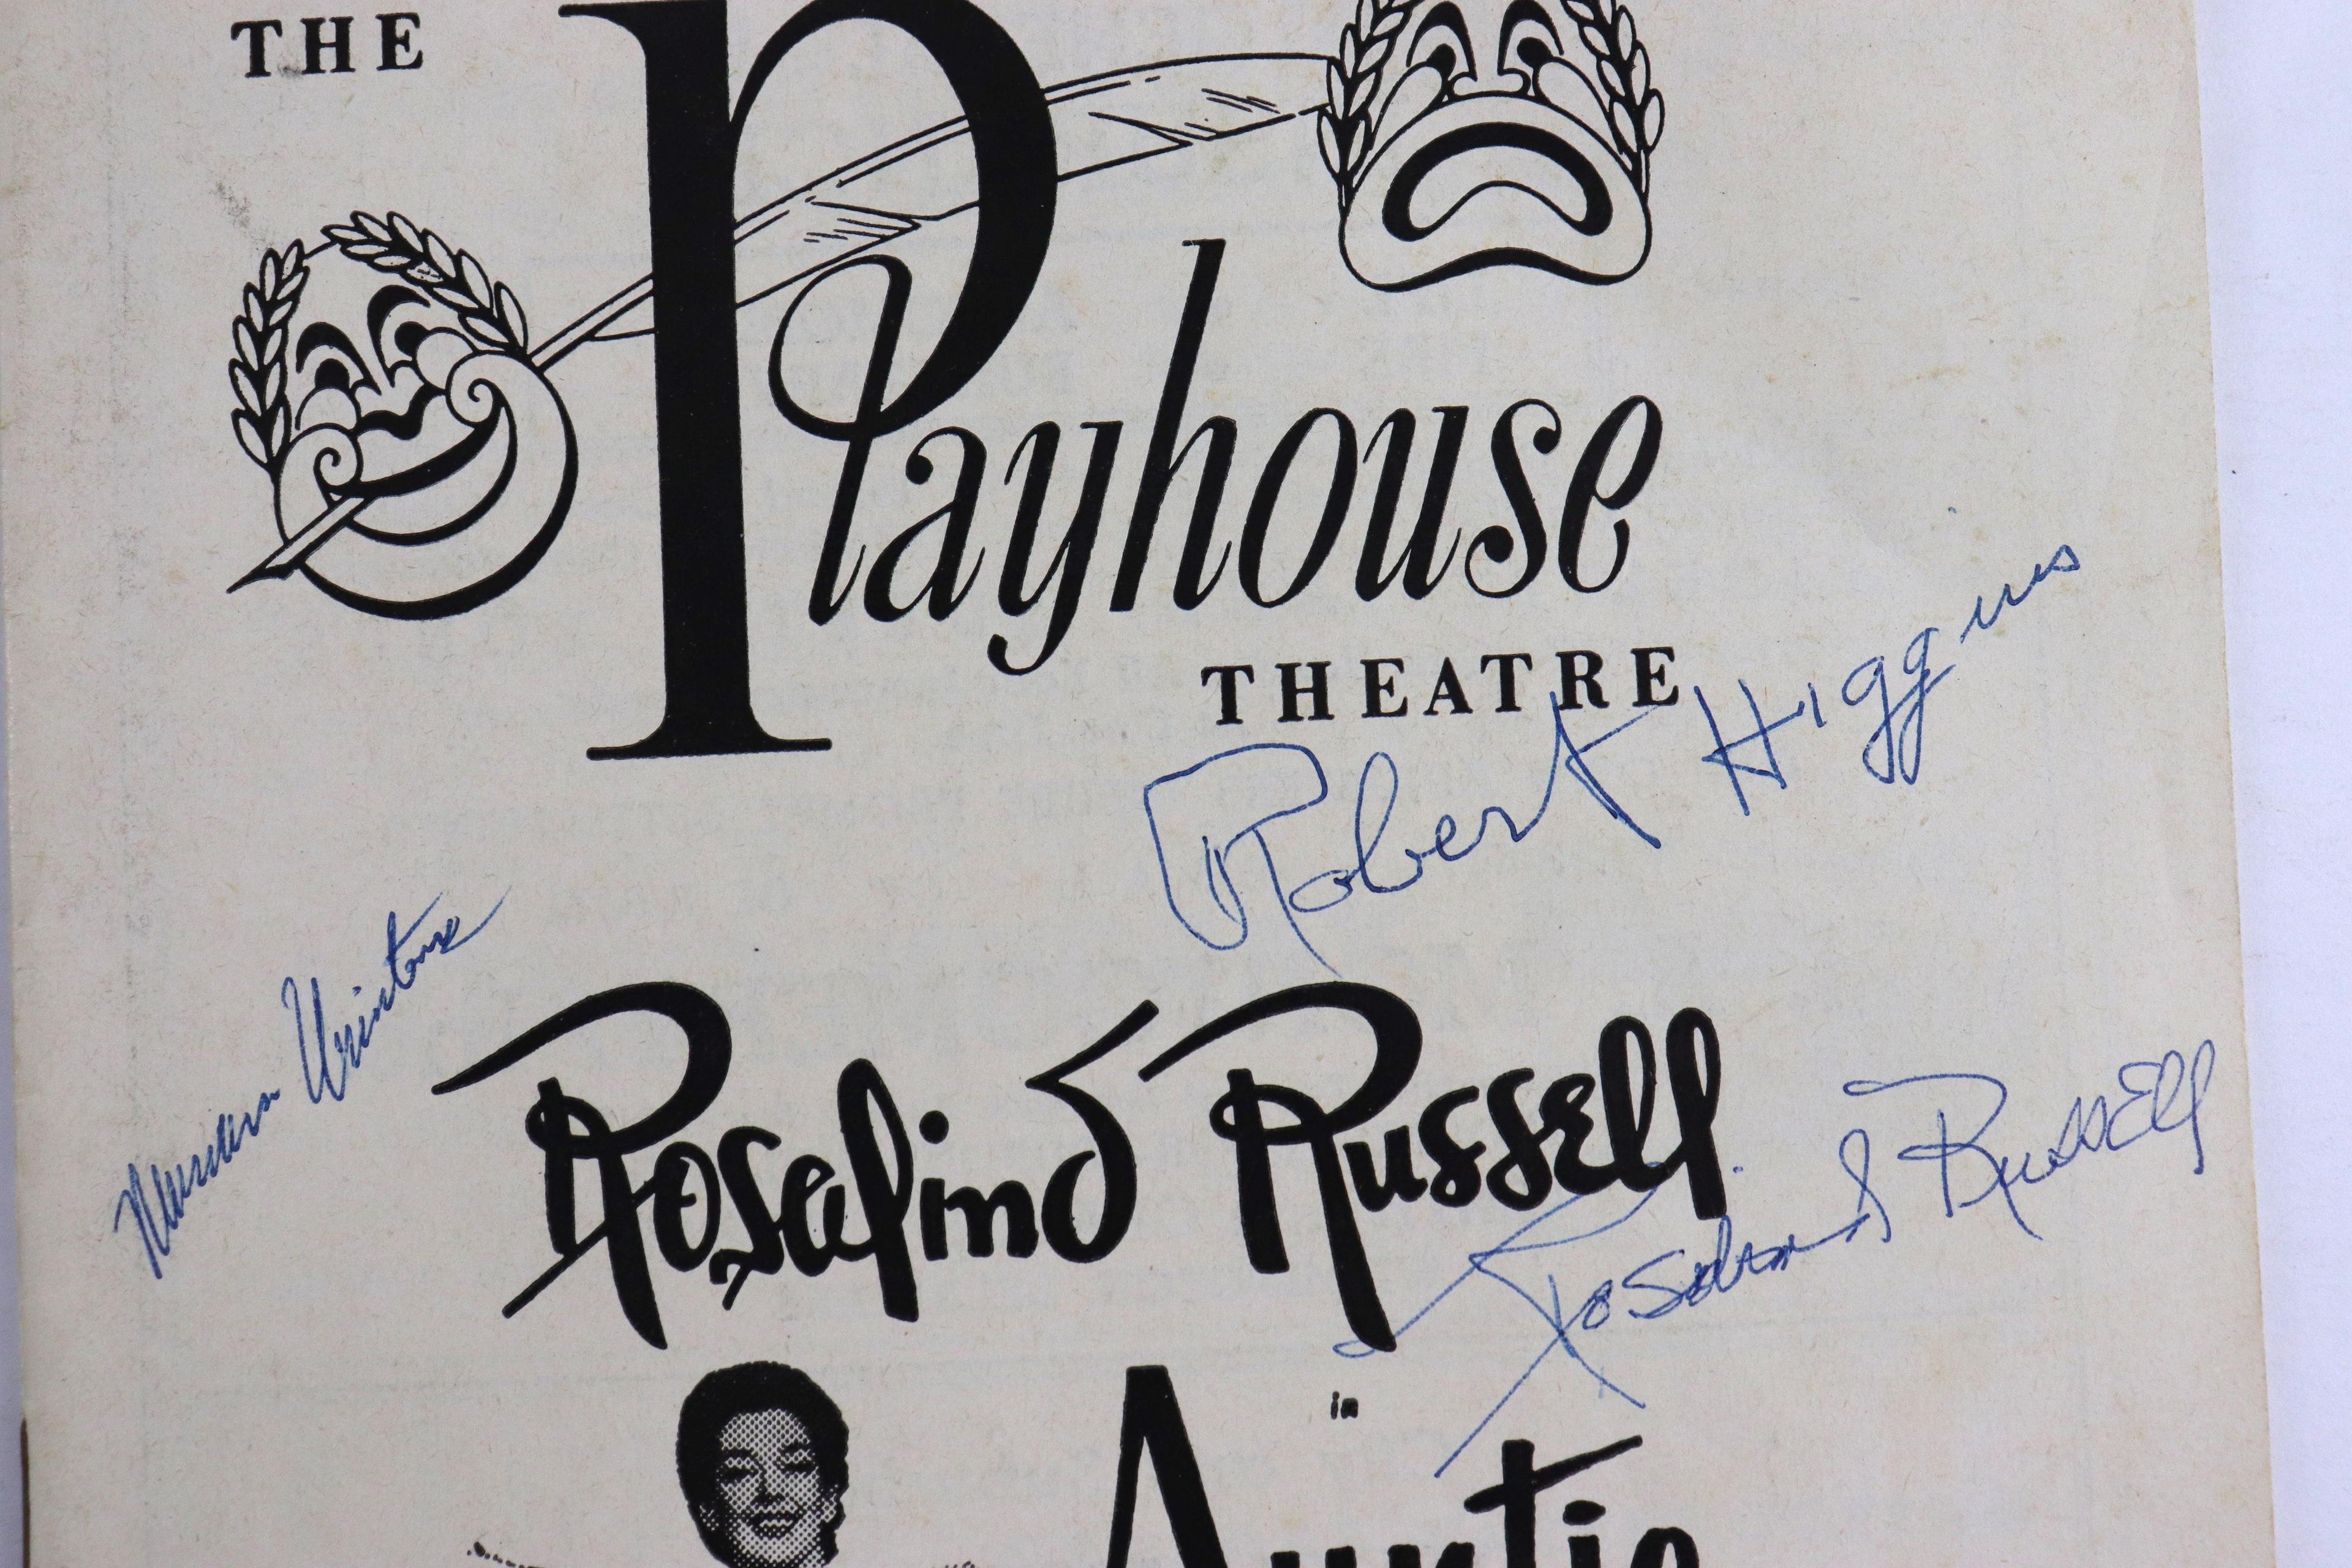 Rosalind Russell Signed Play Program